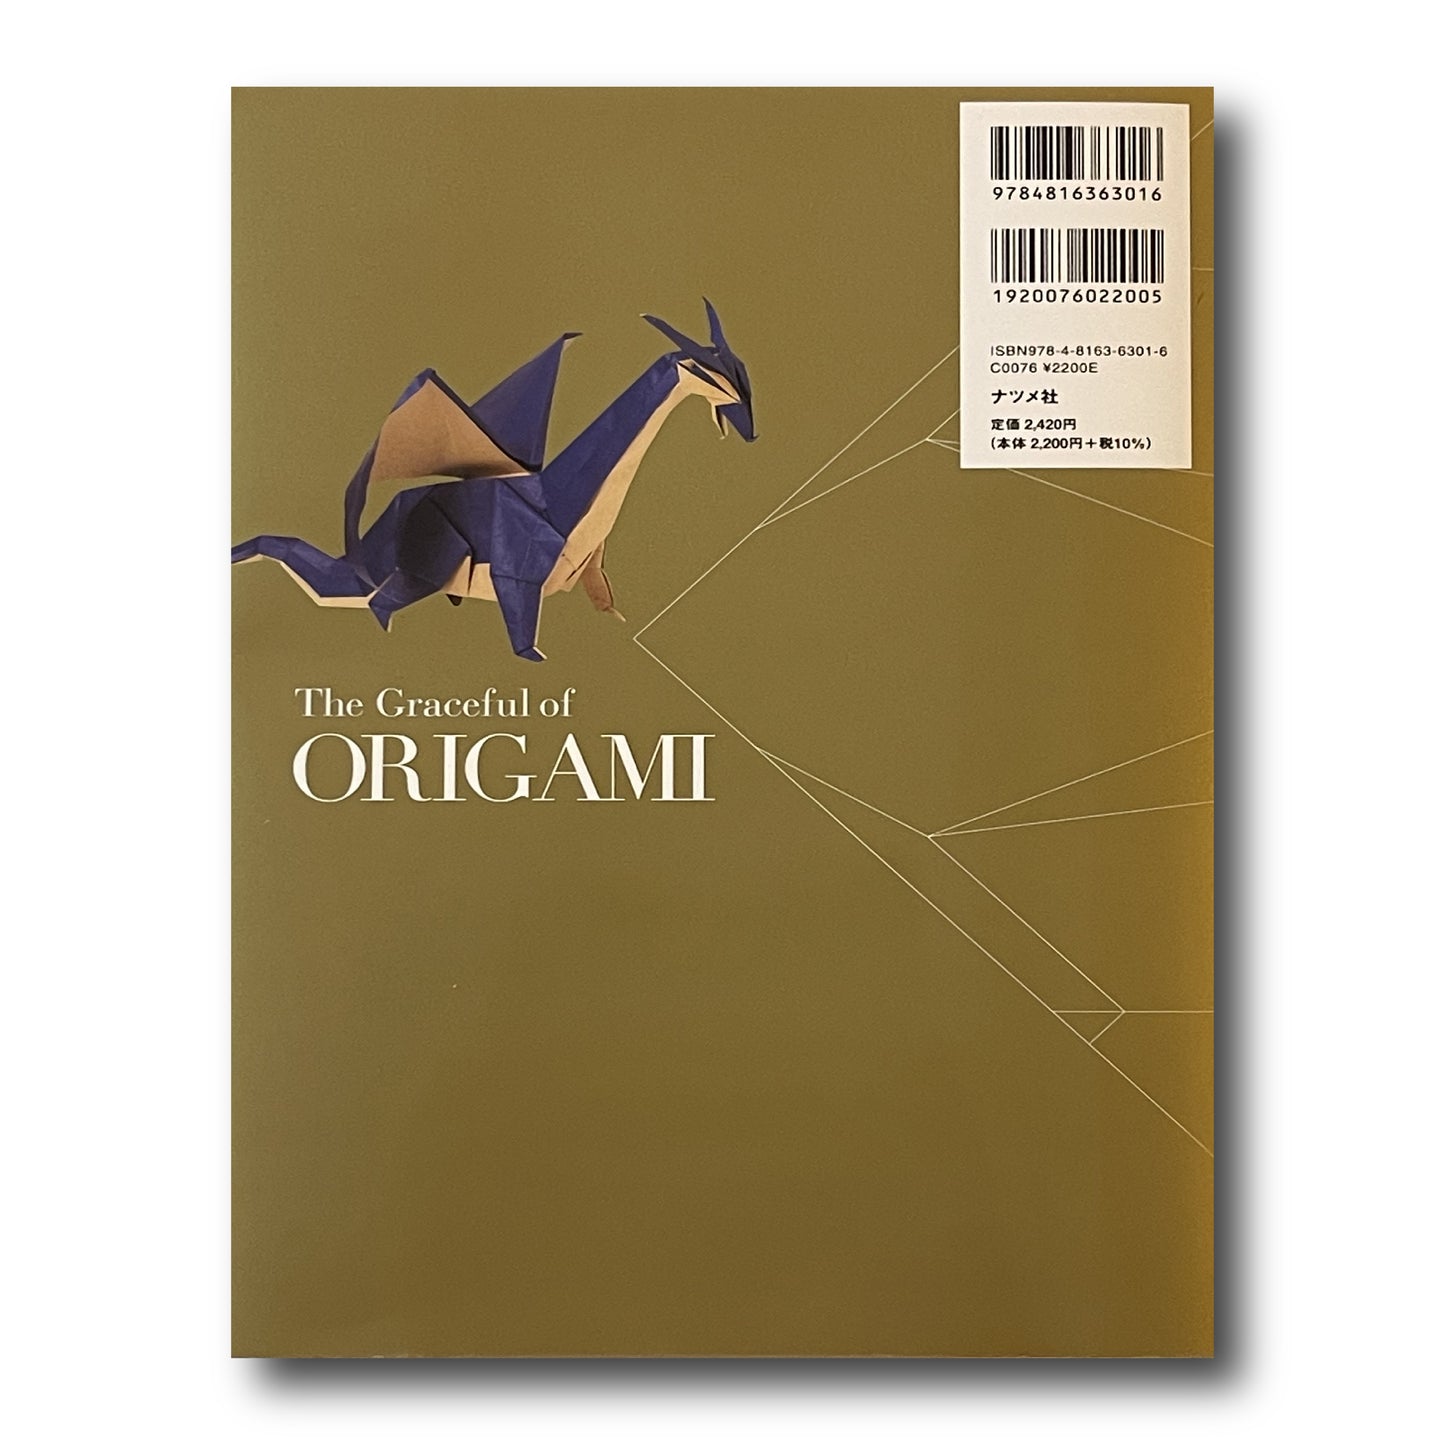 The Graceful of Origami (Japanese Edition)